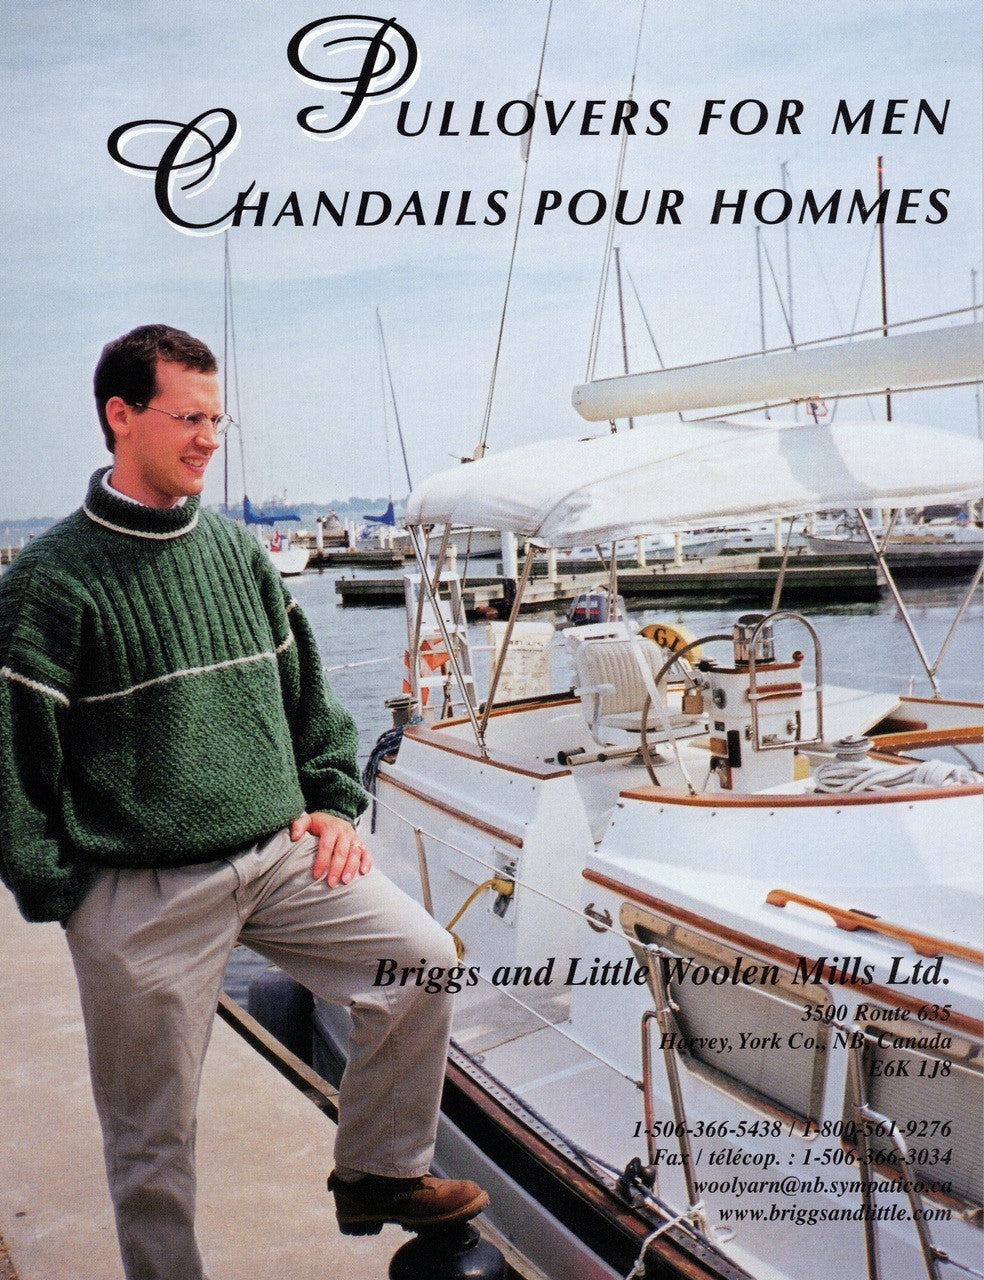 Briggs and Little - Pullovers For Men Patterns Book